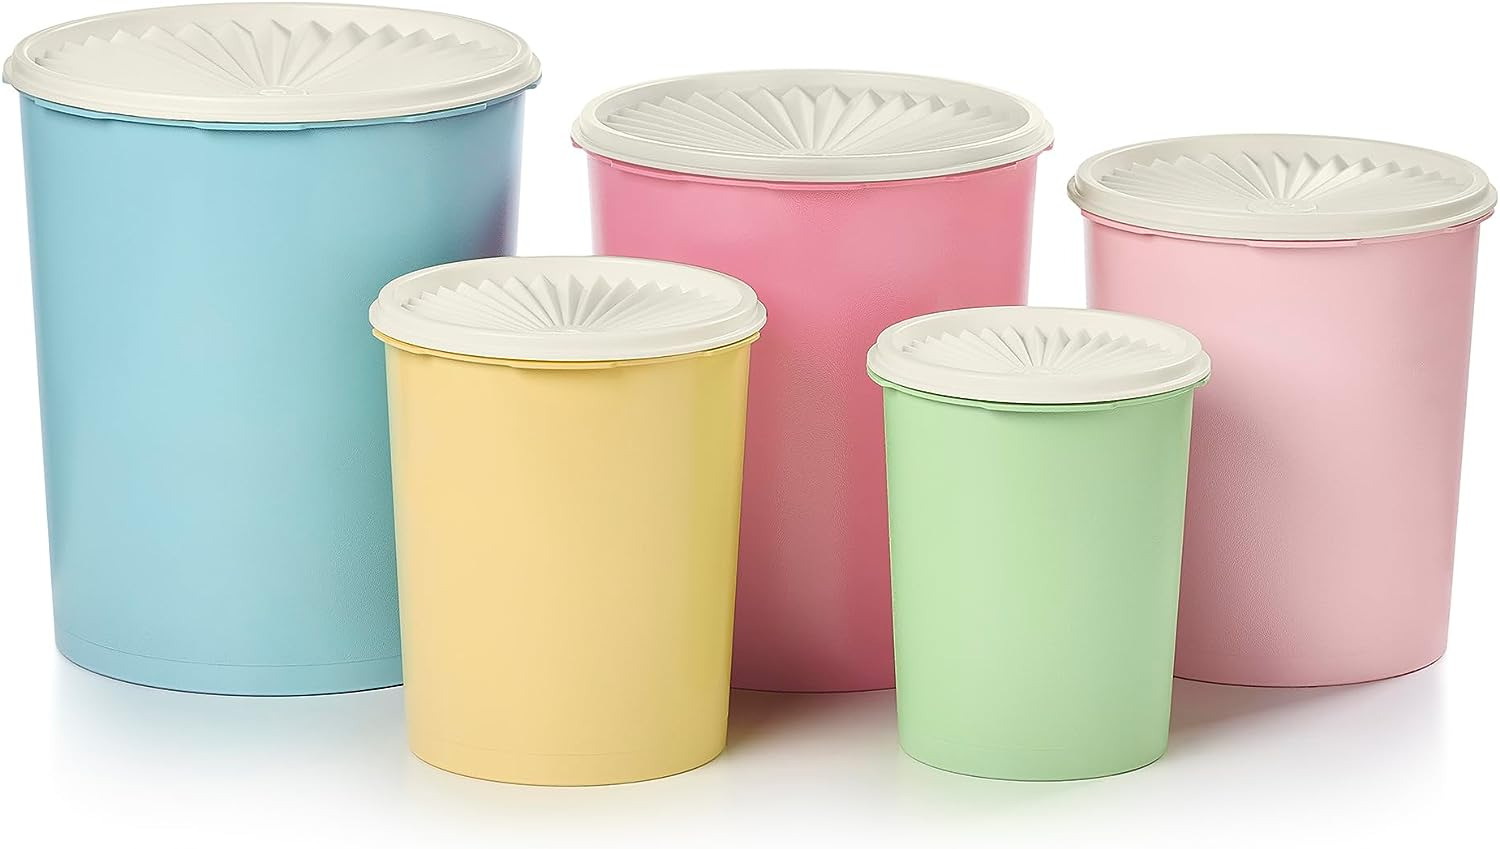 Heritage Collection 10 Piece Nested Canister Set in Vintage Colors